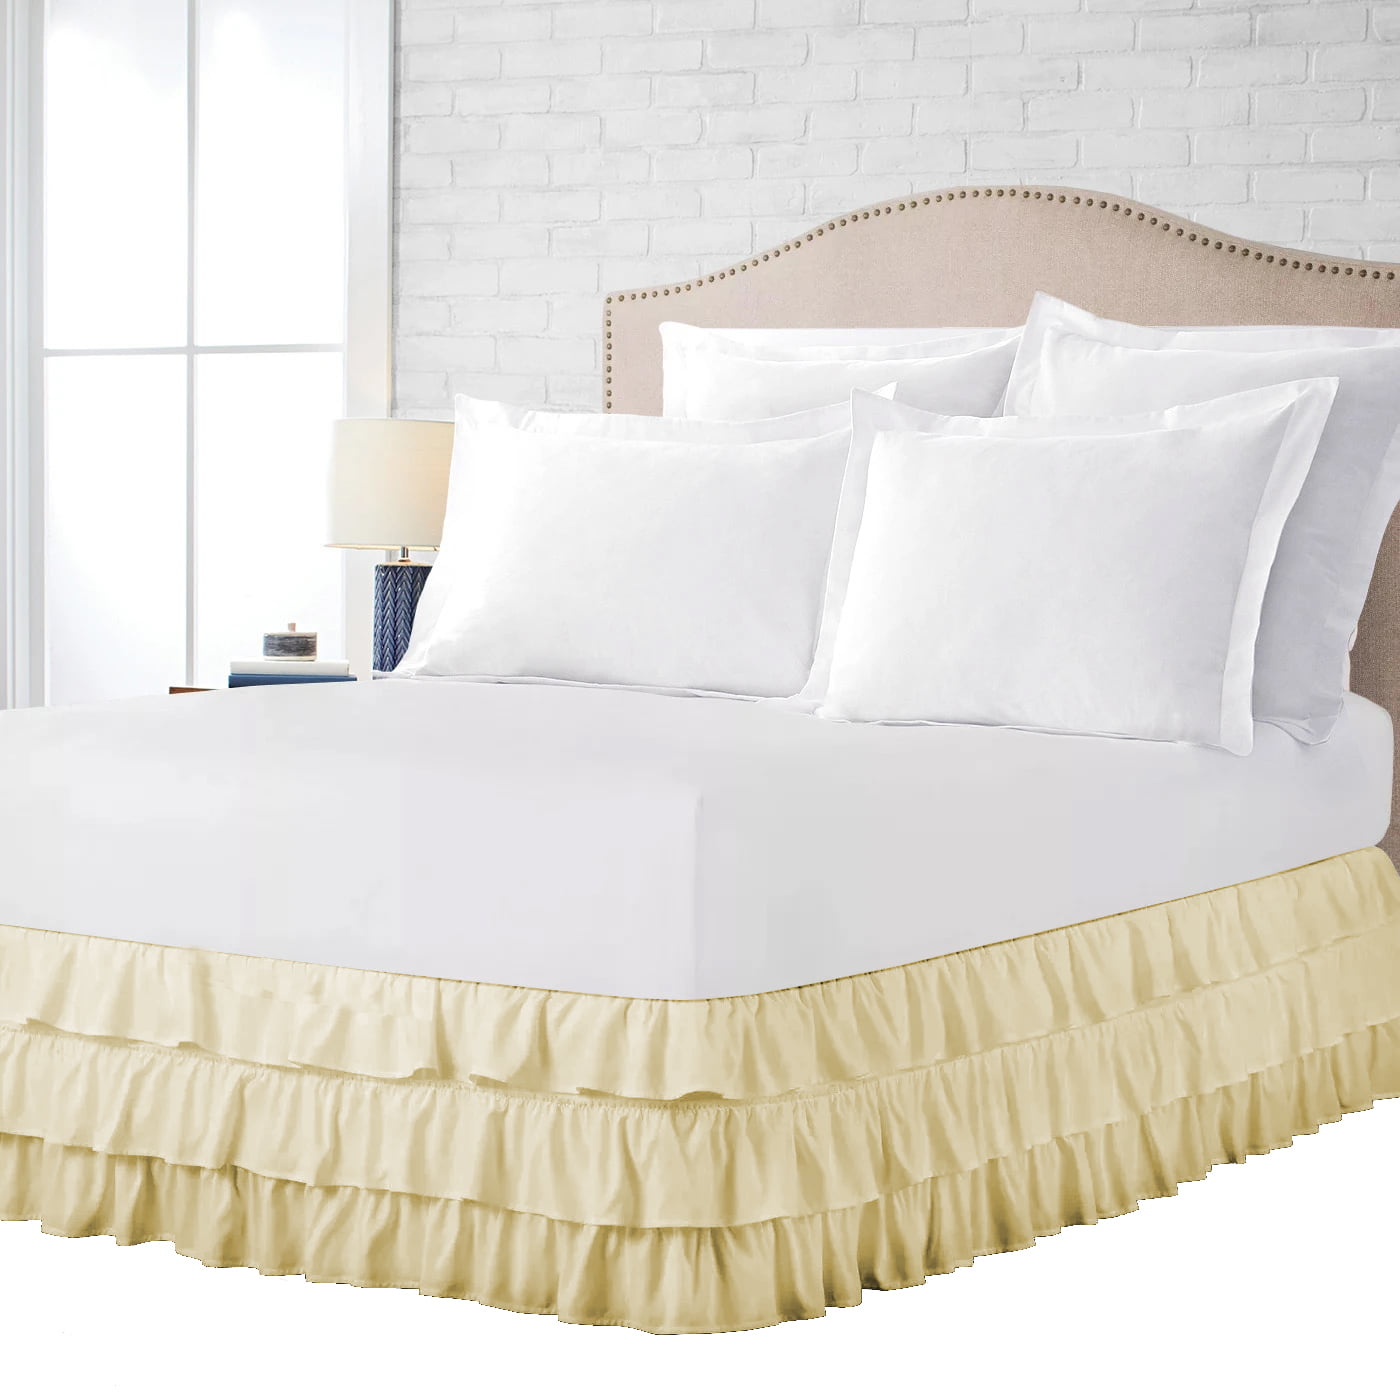 1000TC Egyptian Cotton Multi Ruffle Bed Skirt 15" Drop Choose Size n Color 